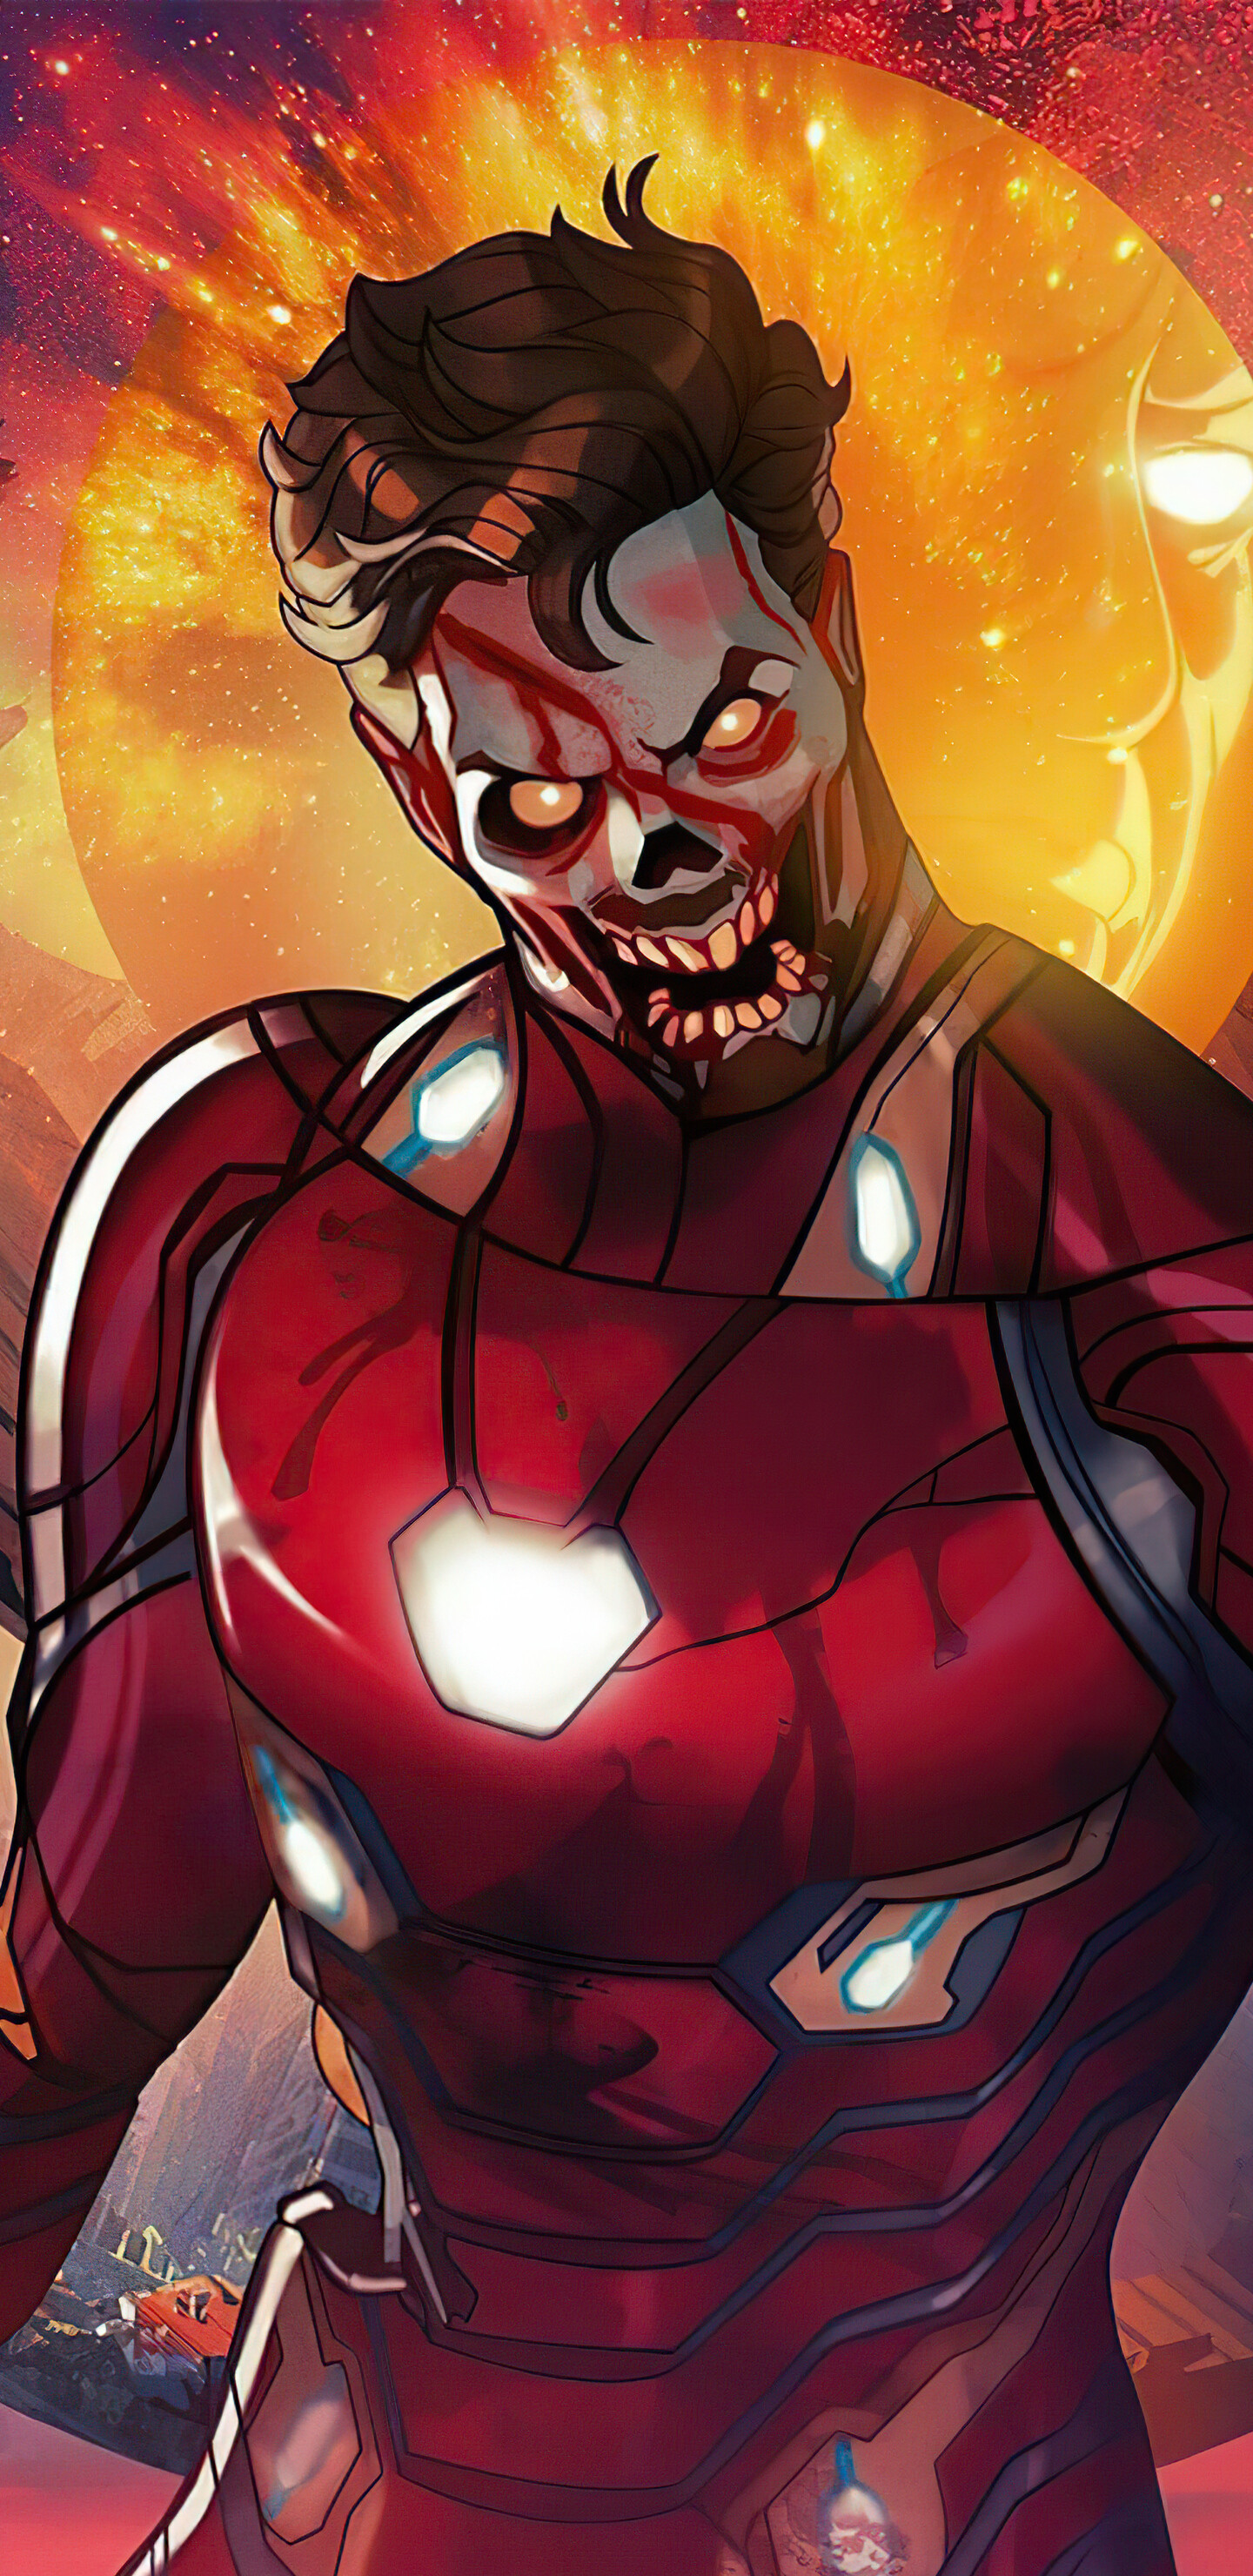 What If...?: Iron Man Zombie, Jeffrey Wright narrates the series as the Watcher. 1440x2960 HD Wallpaper.